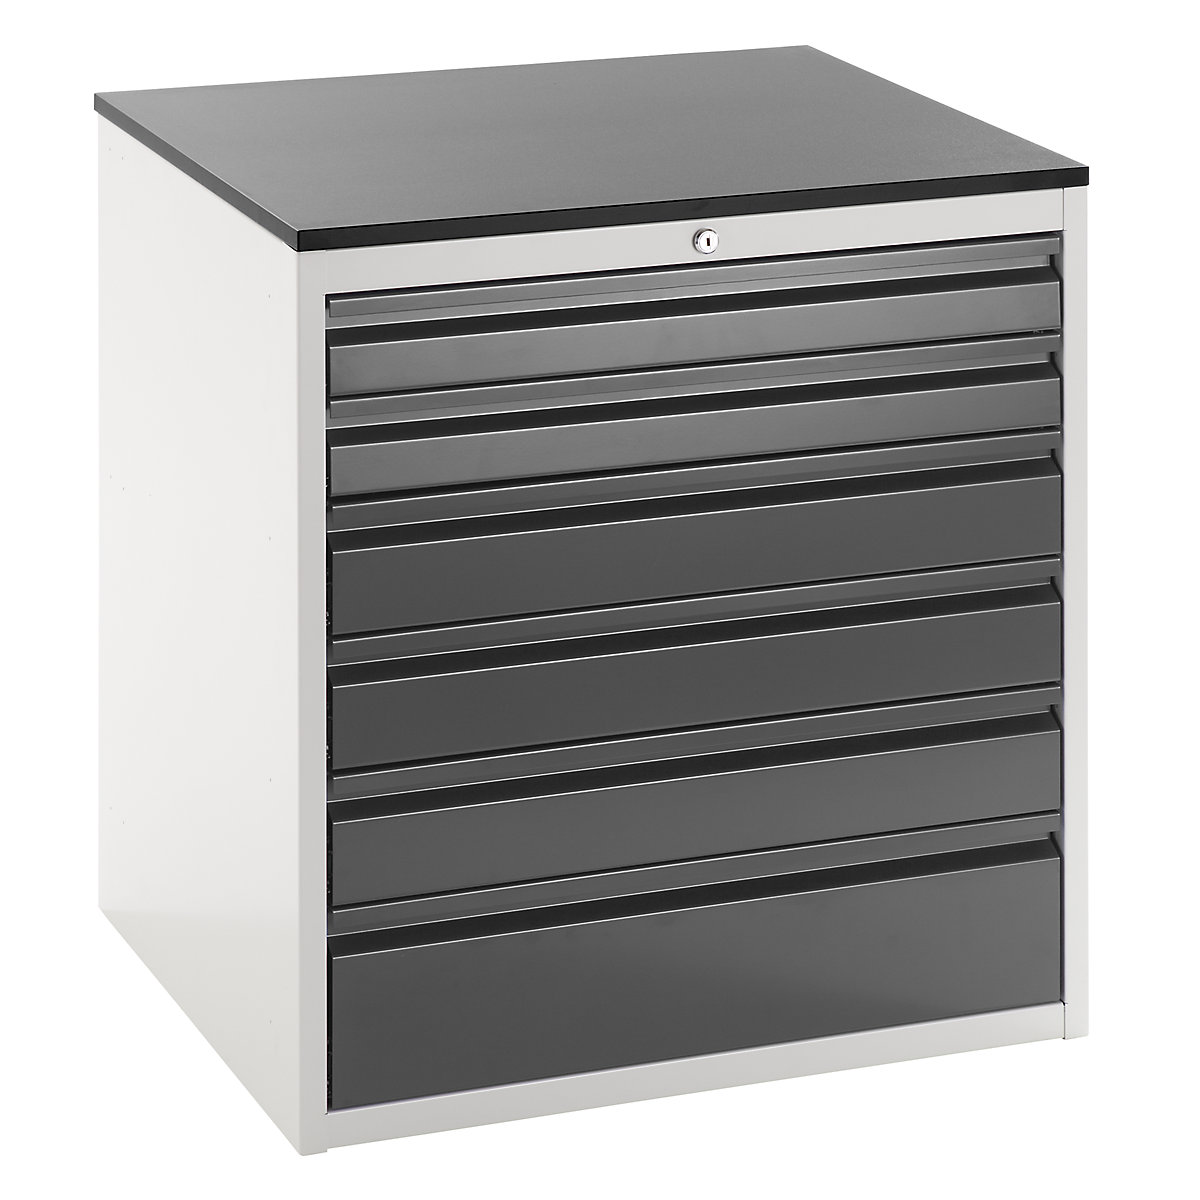 Drawer cupboard with telescopic guides – RAU, height 820 mm, drawers: 2 x 90, 3 x 120, 1 x 180 mm, light grey / charcoal, width 770 mm-13